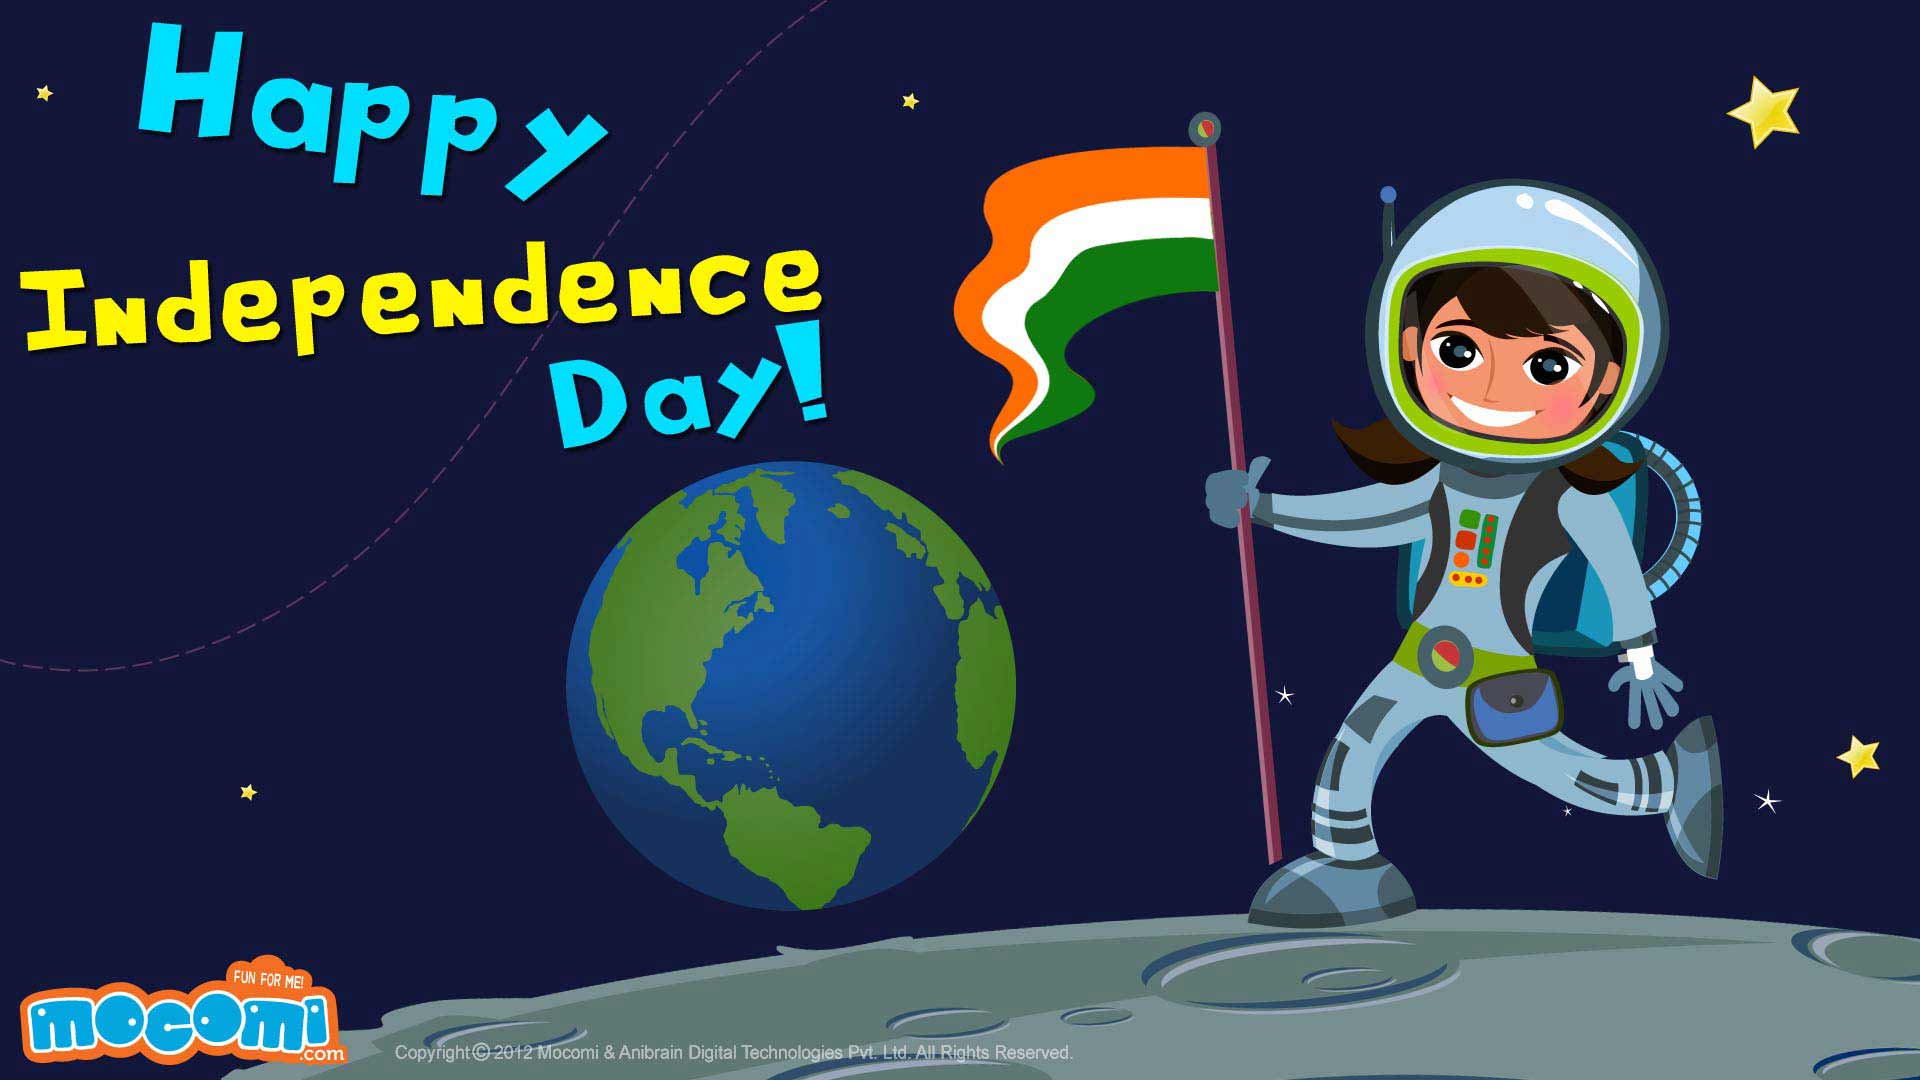 Happy Independence Day – On The Moon